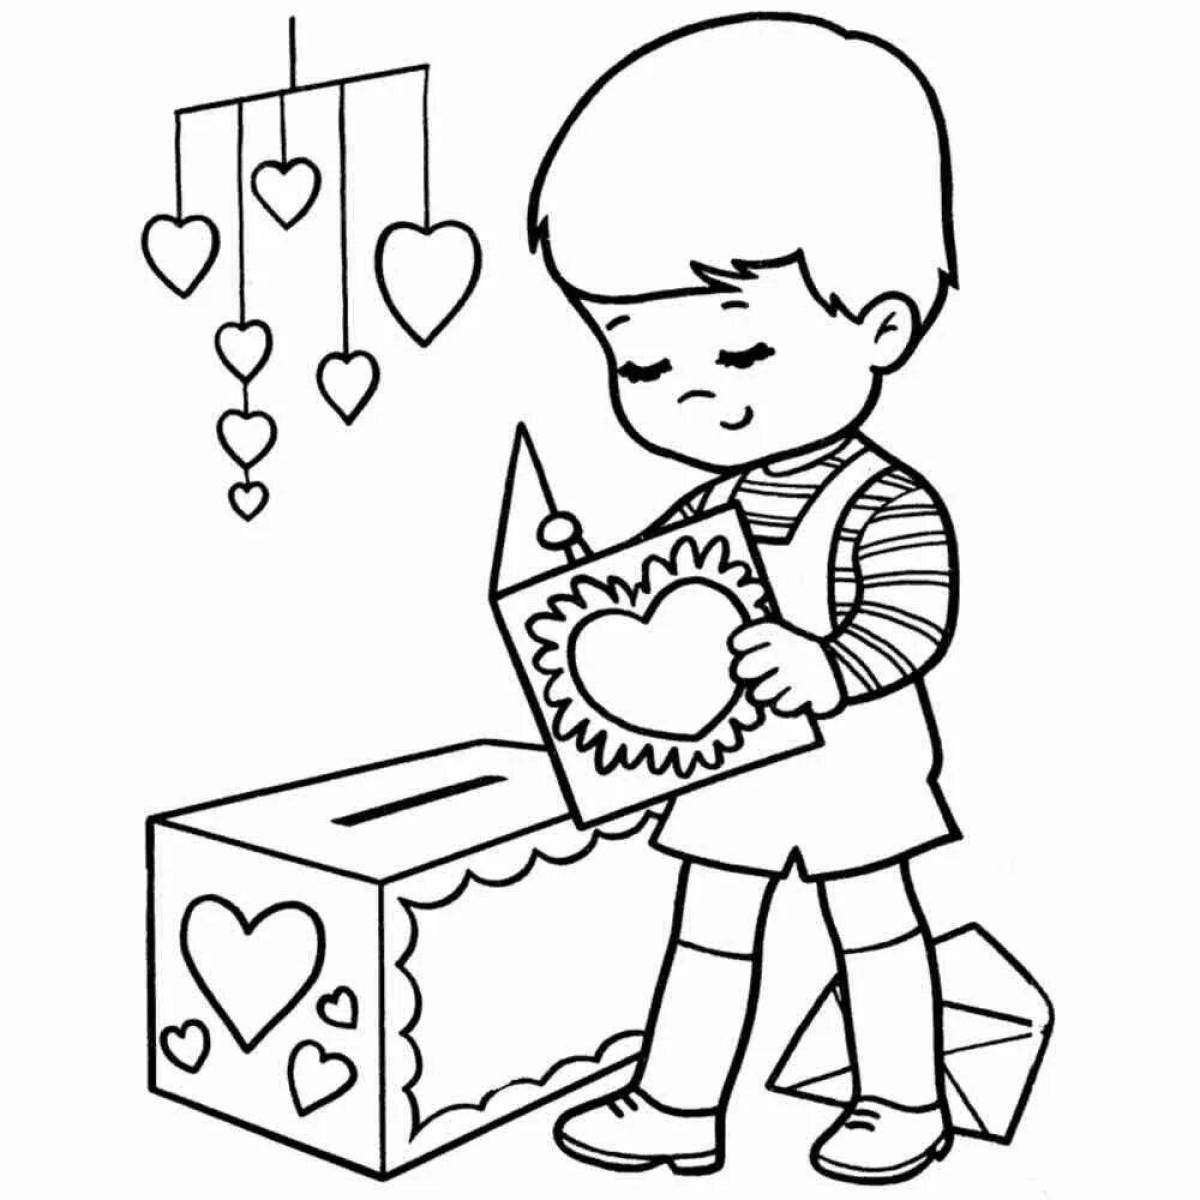 February 14 valentine coloring book